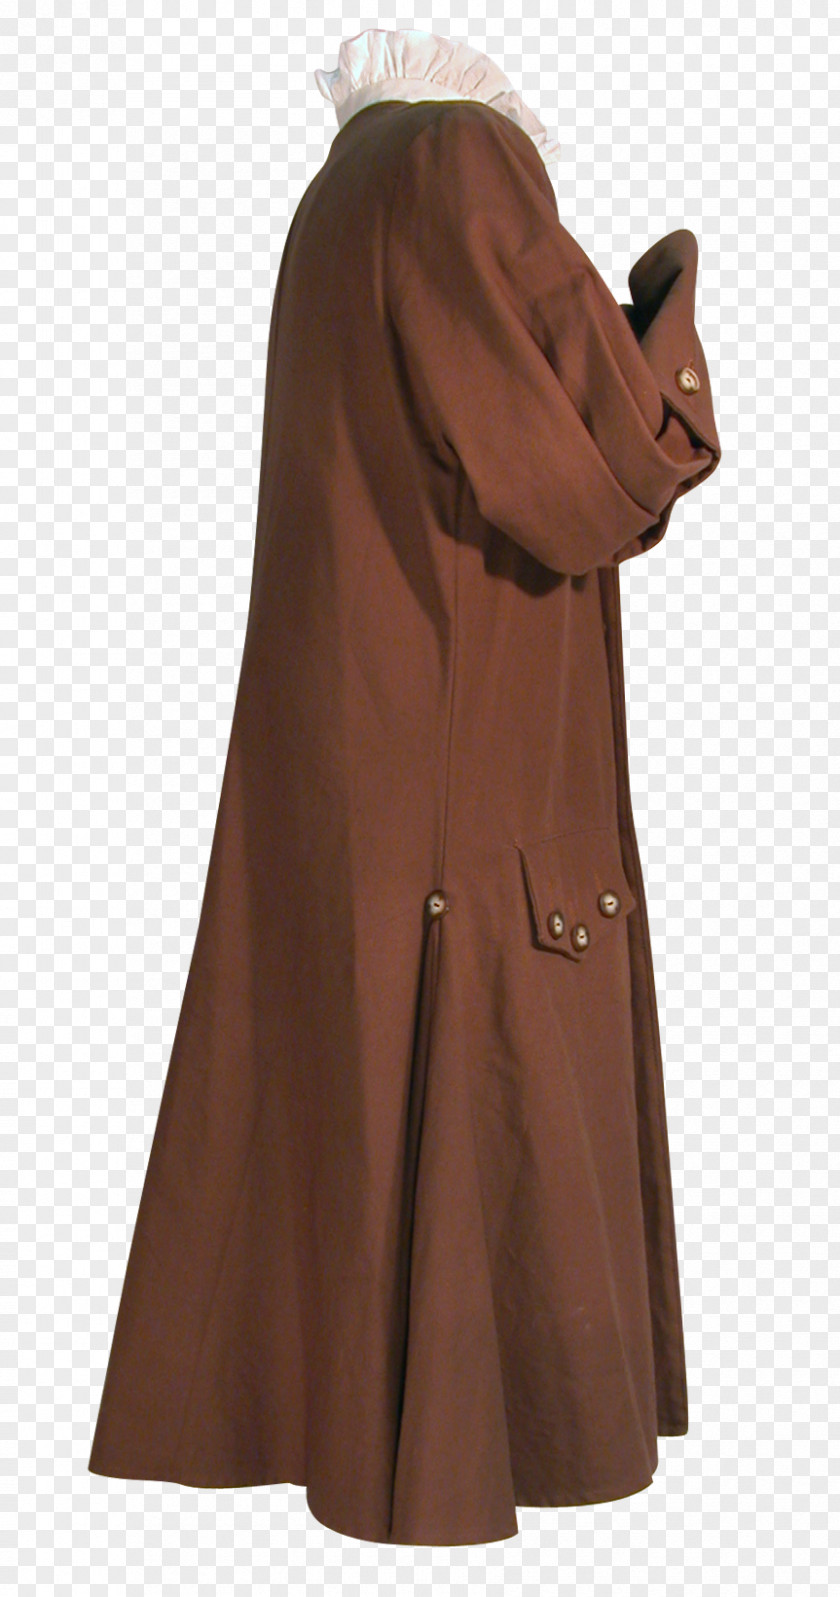 George Bush Coat Piracy Outerwear Skirt Button PNG